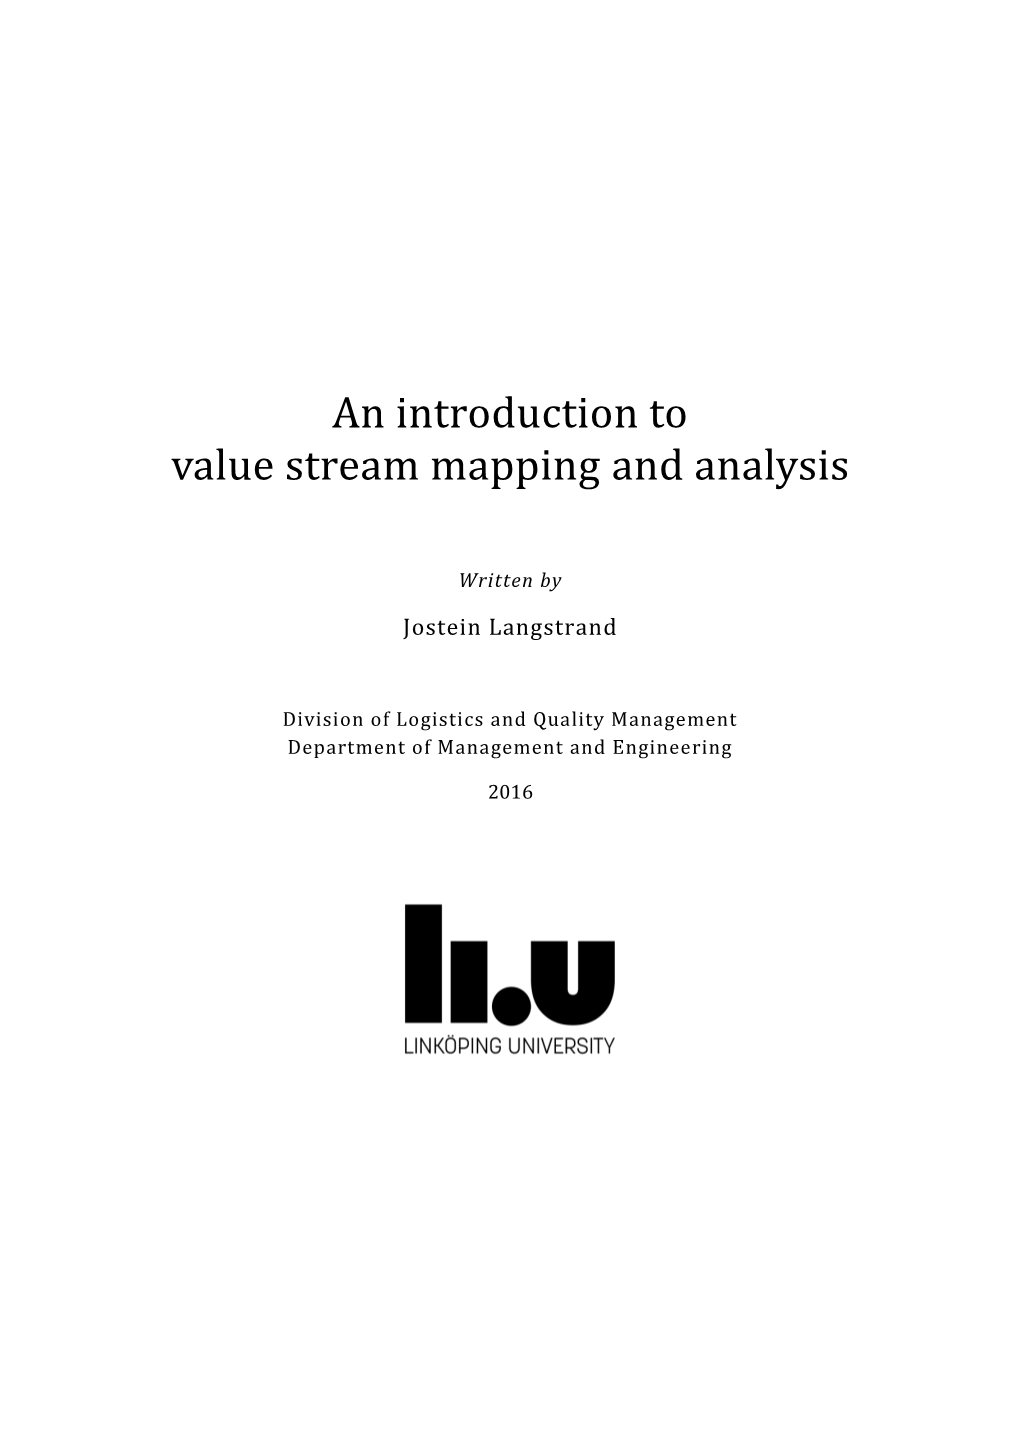 An Introduction to Value Stream Mapping and Analysis